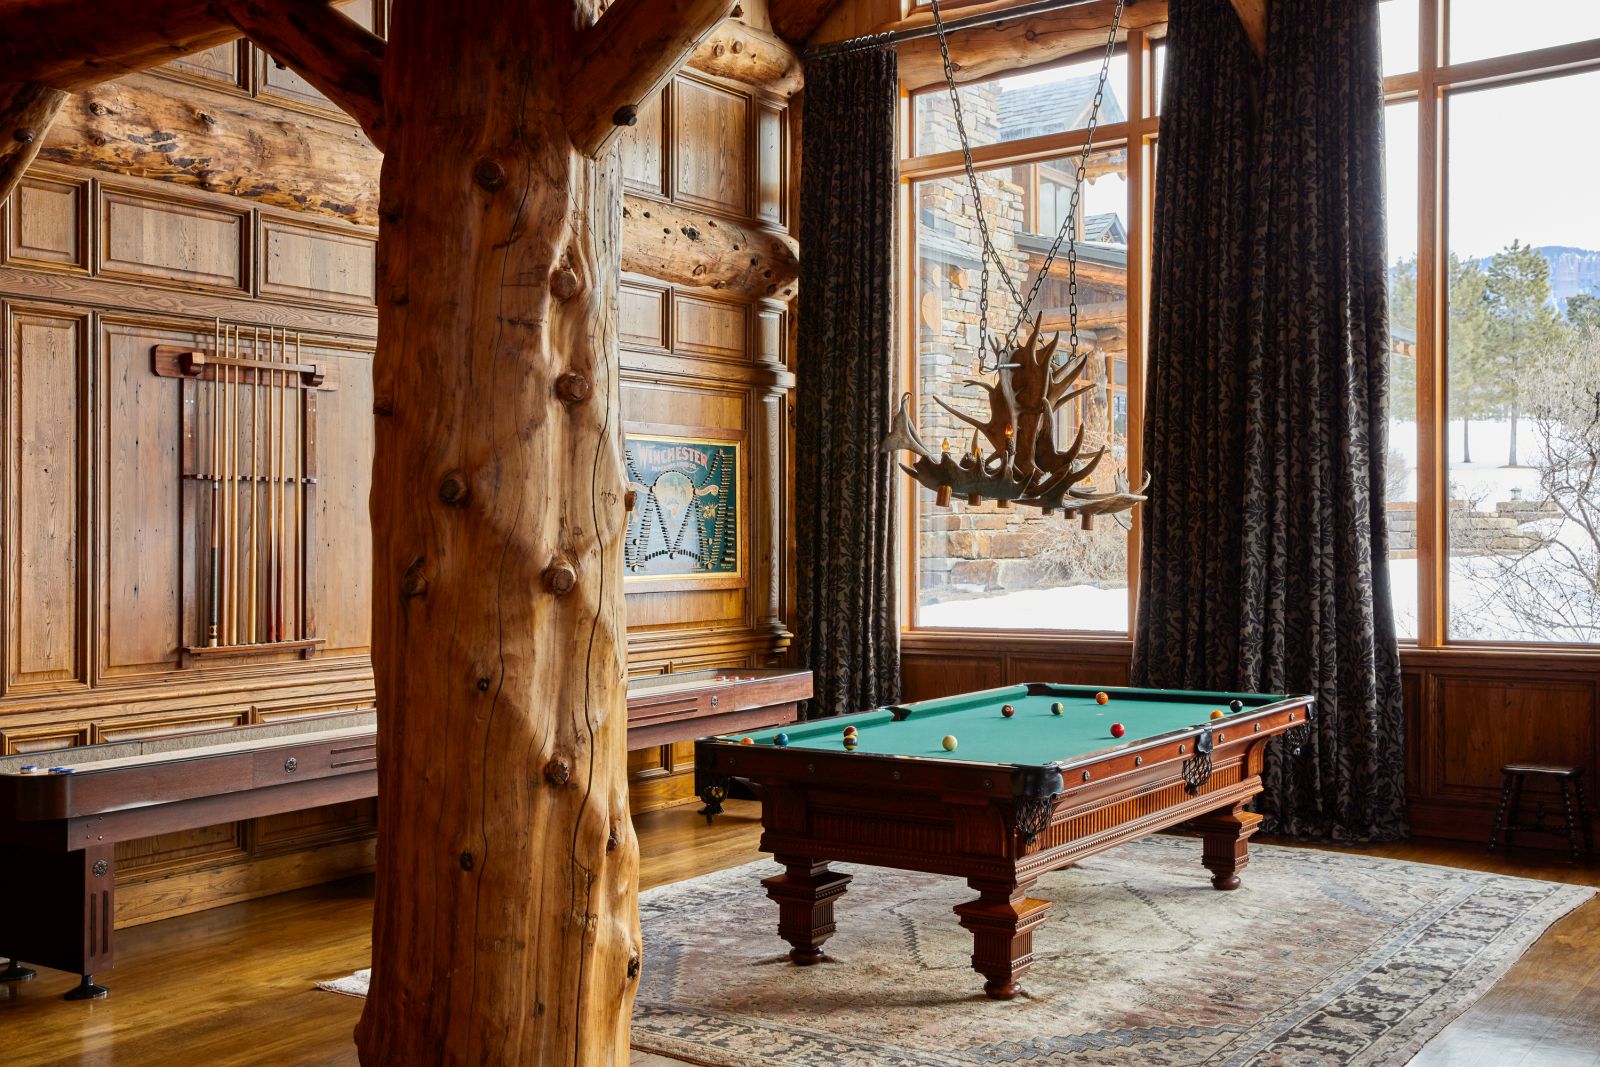 Recreation room at Sleeping Indian Lodge in Colorado in the USA